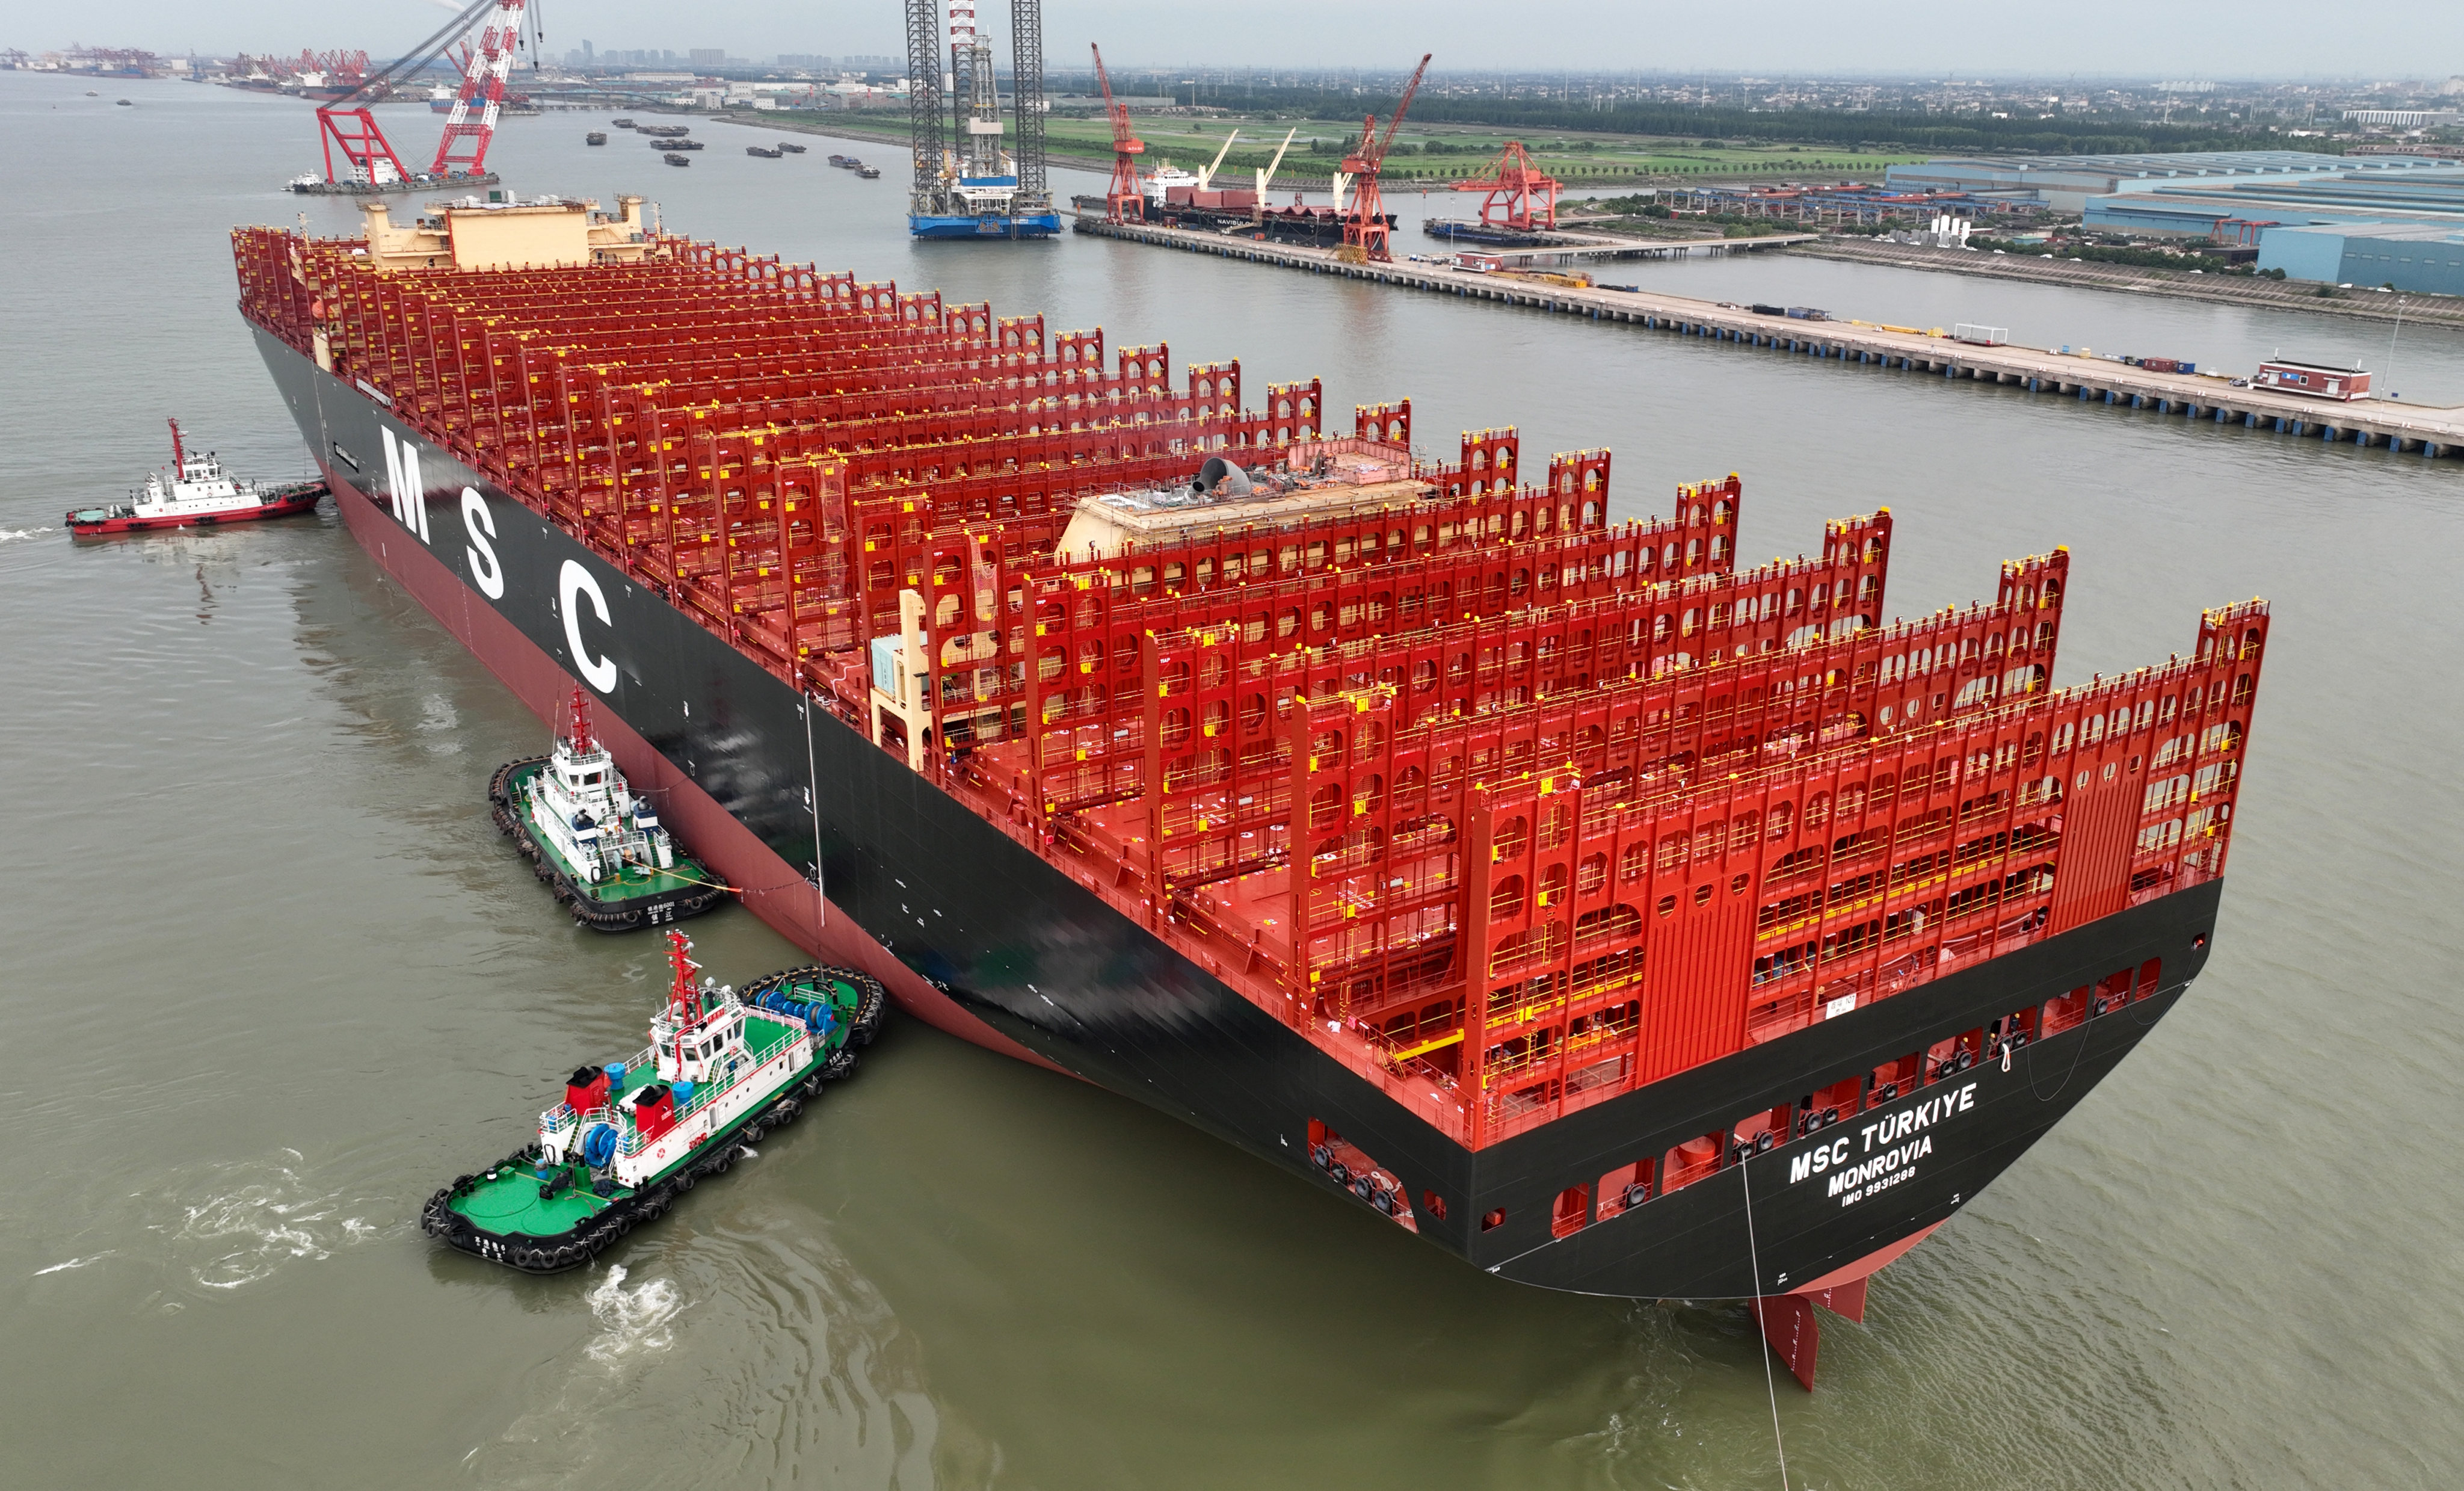 China overtook Greece in August as running the largest commercial fleet in terms of tonnage, with a capacity of 294.2 million gross tonnage, according to the state-backed Xinhua News Agency. Photo: Costfoto/NurPhoto via Getty Images